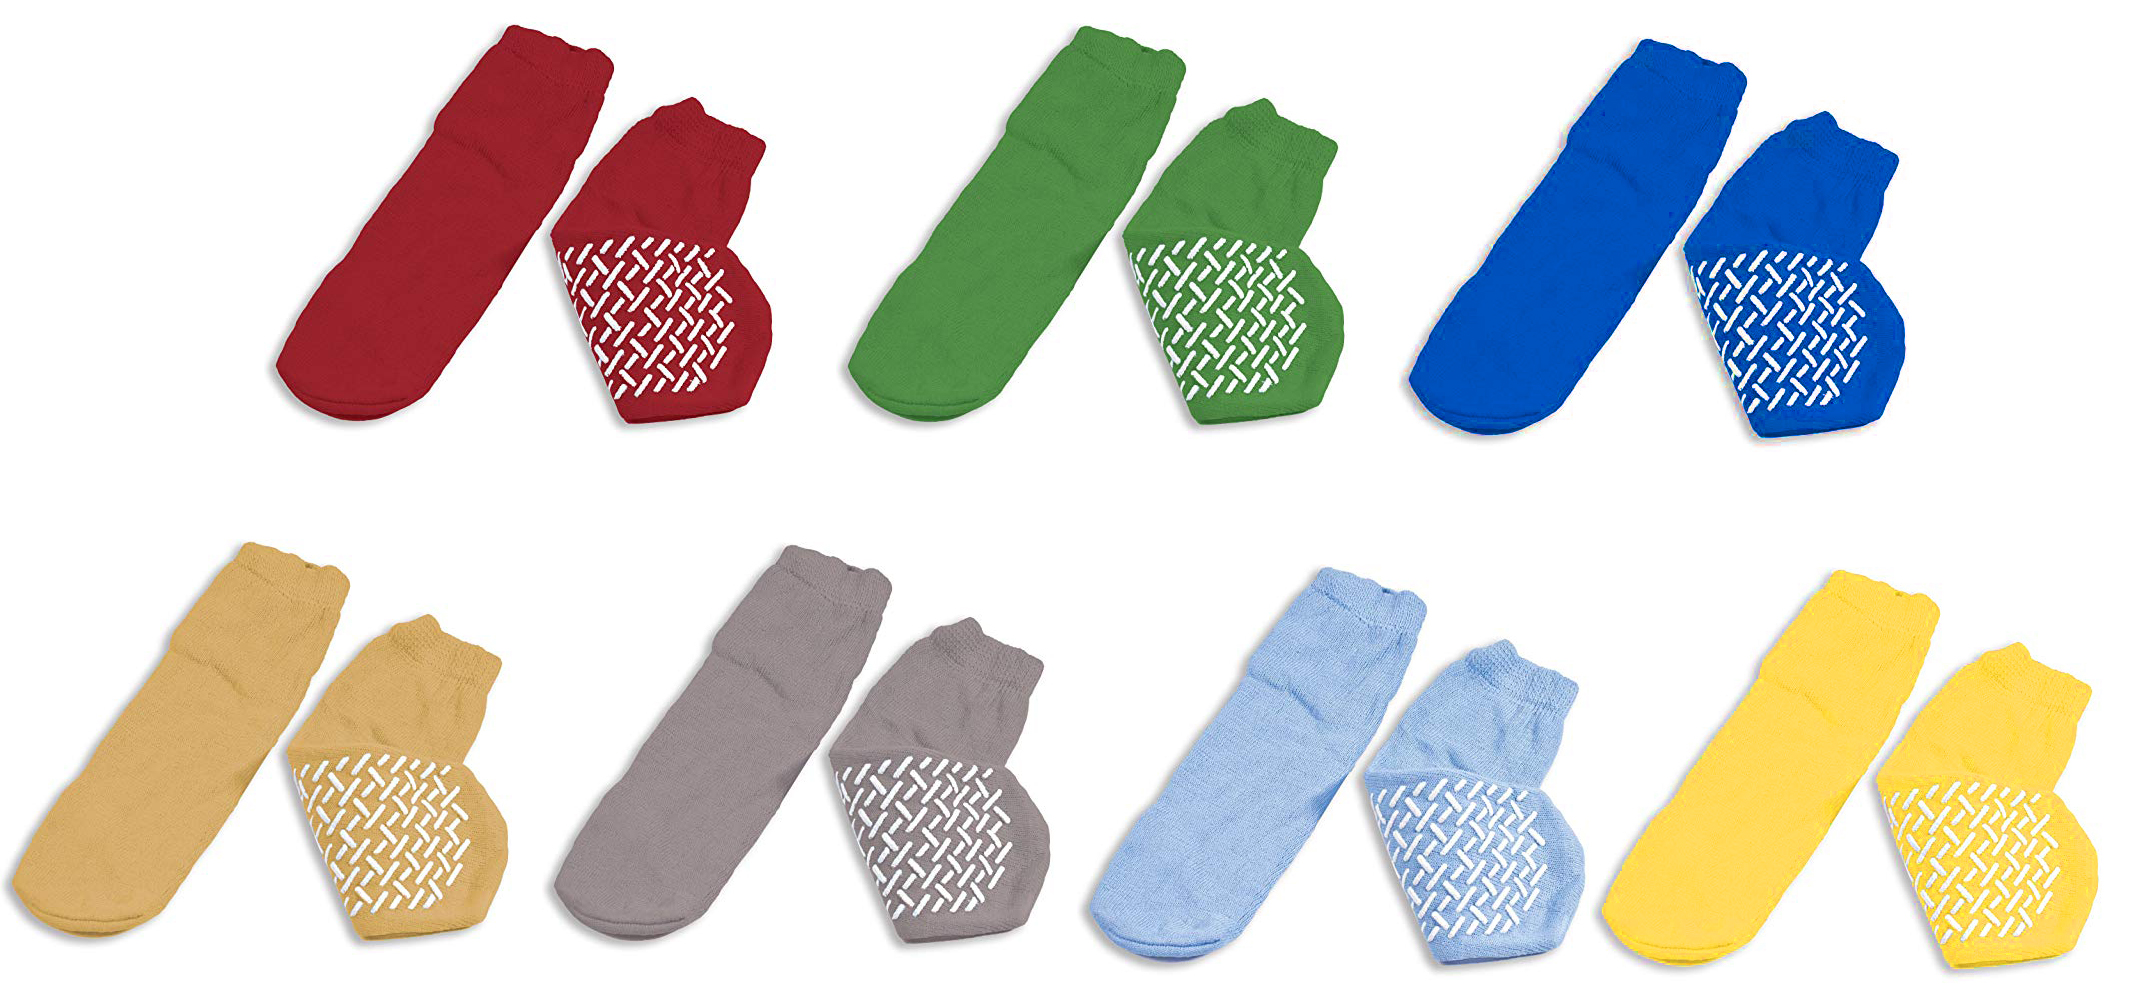 MEDesign products for back pain relief: Double Tread Slipper Socks Case of  48, Feet and Walking, DTSSCQ